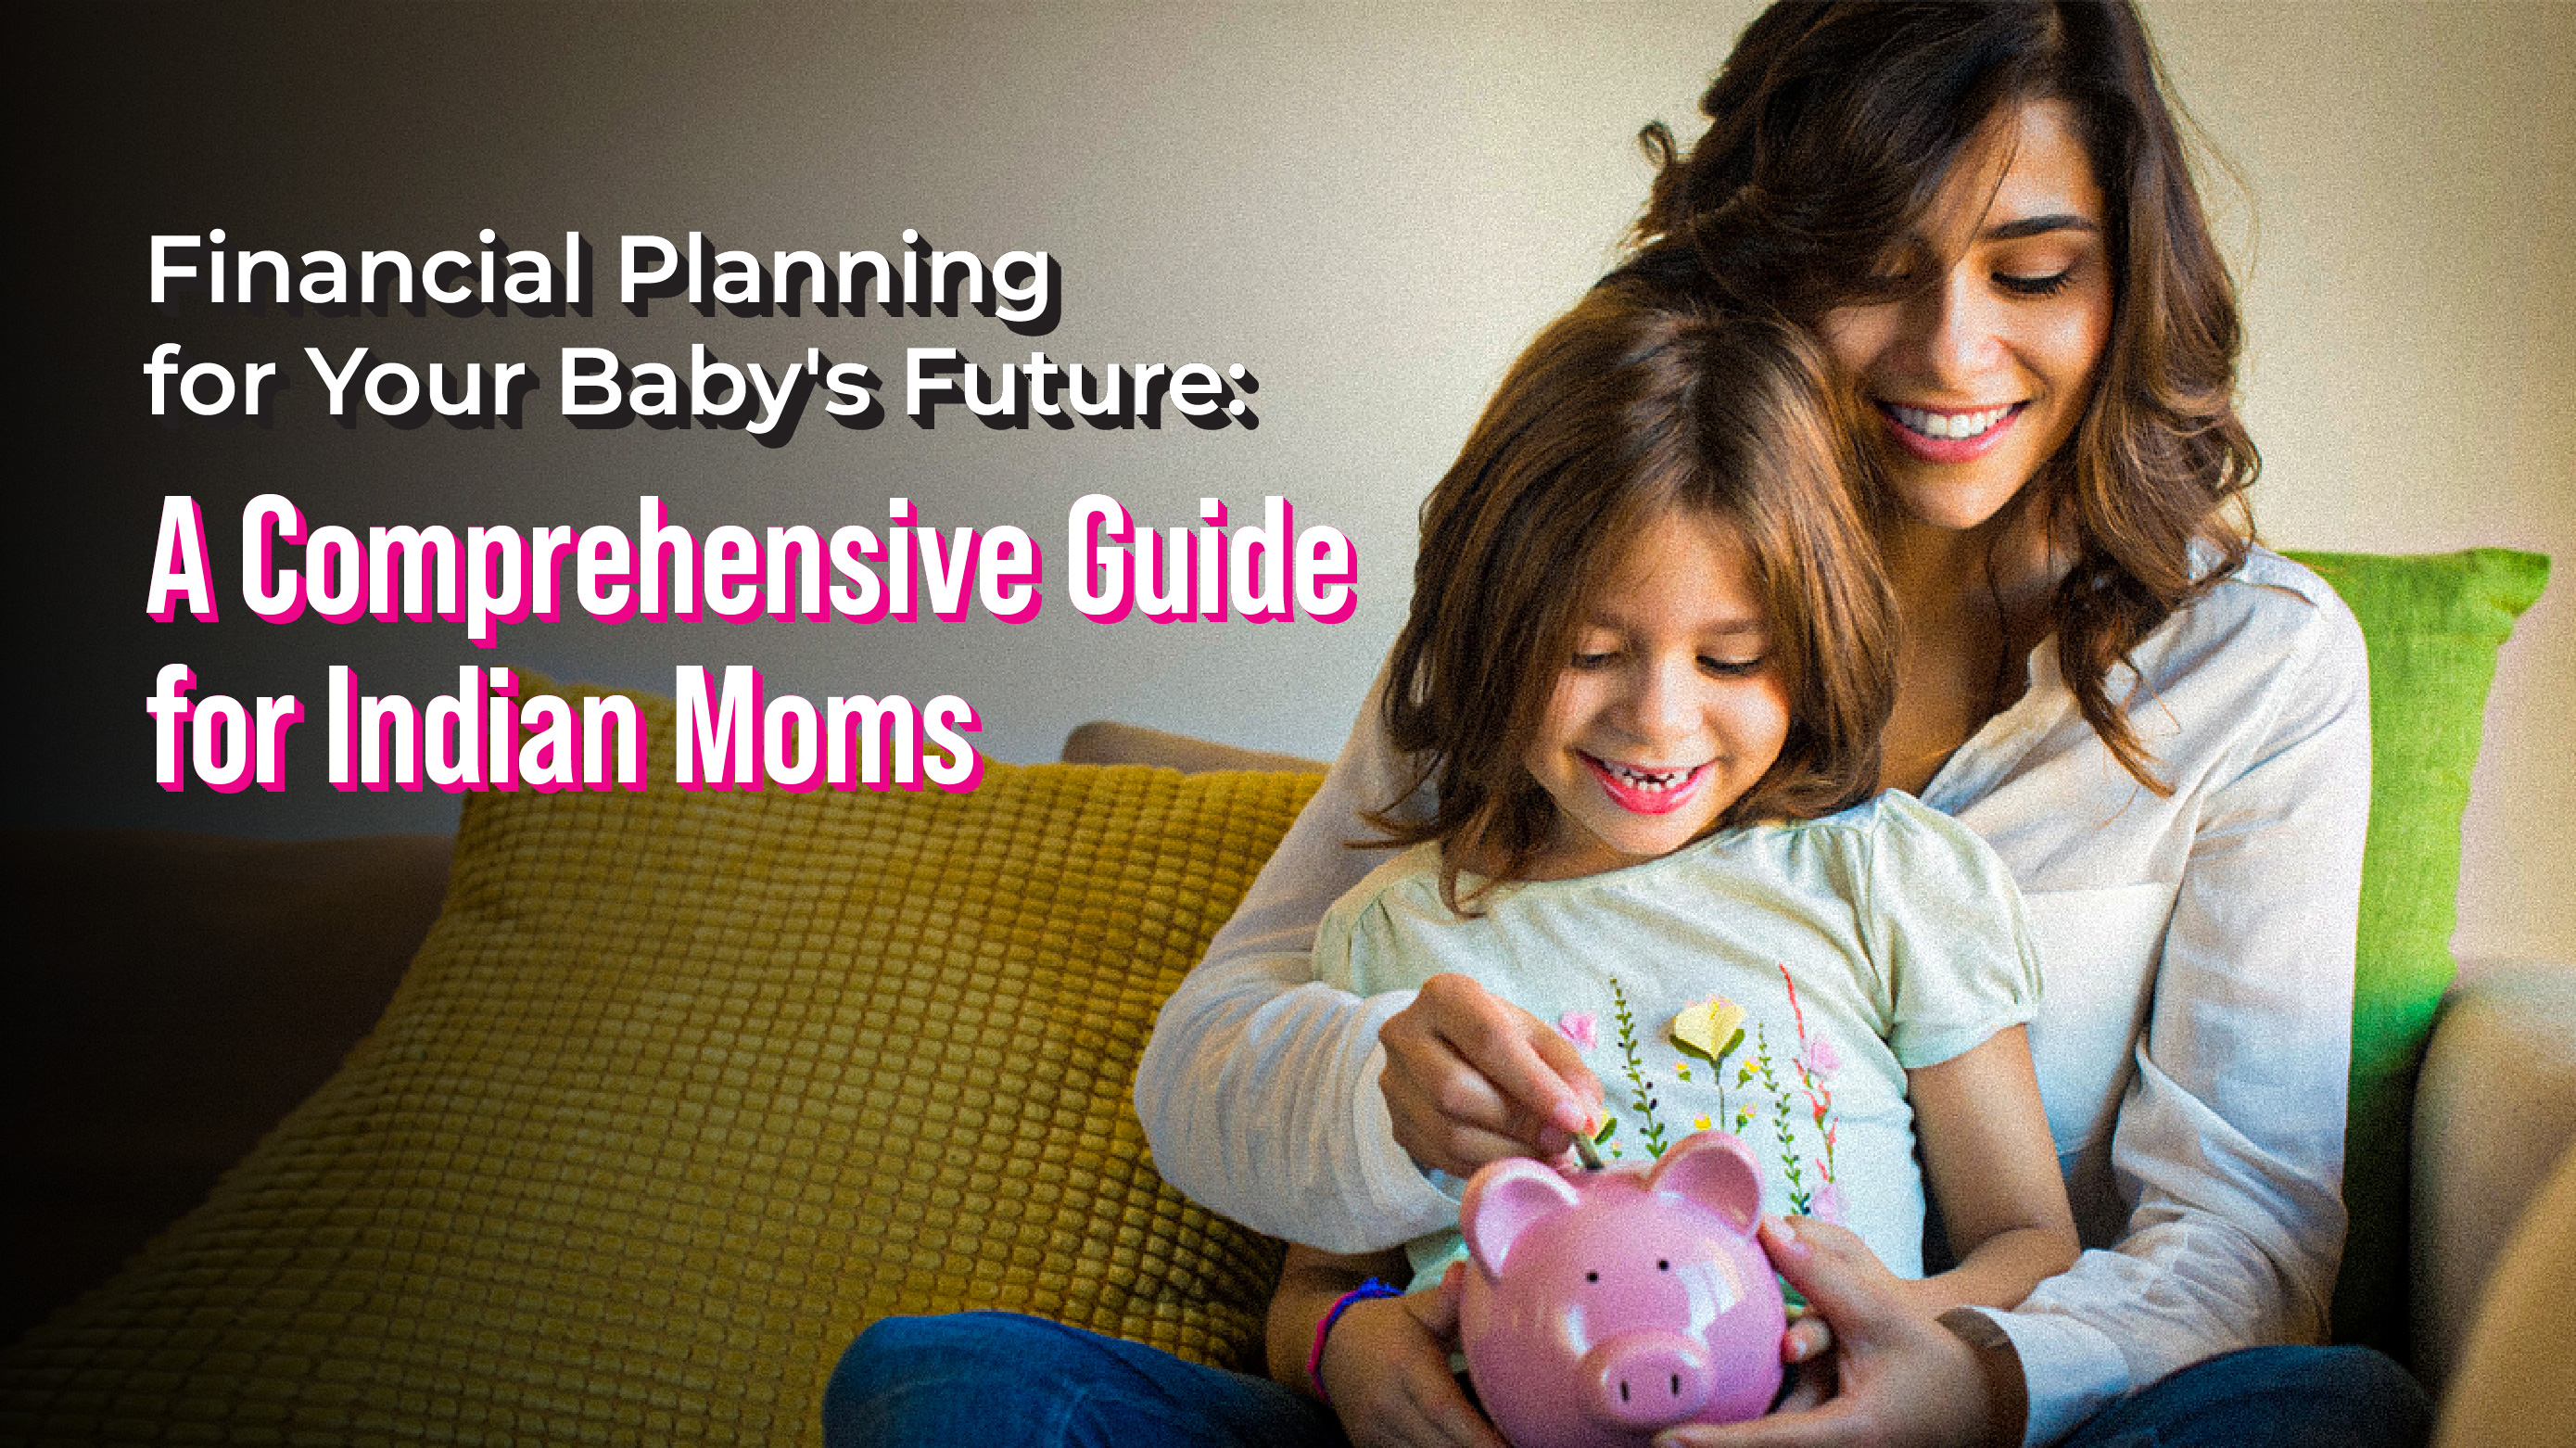 financial planning for your babys future -12